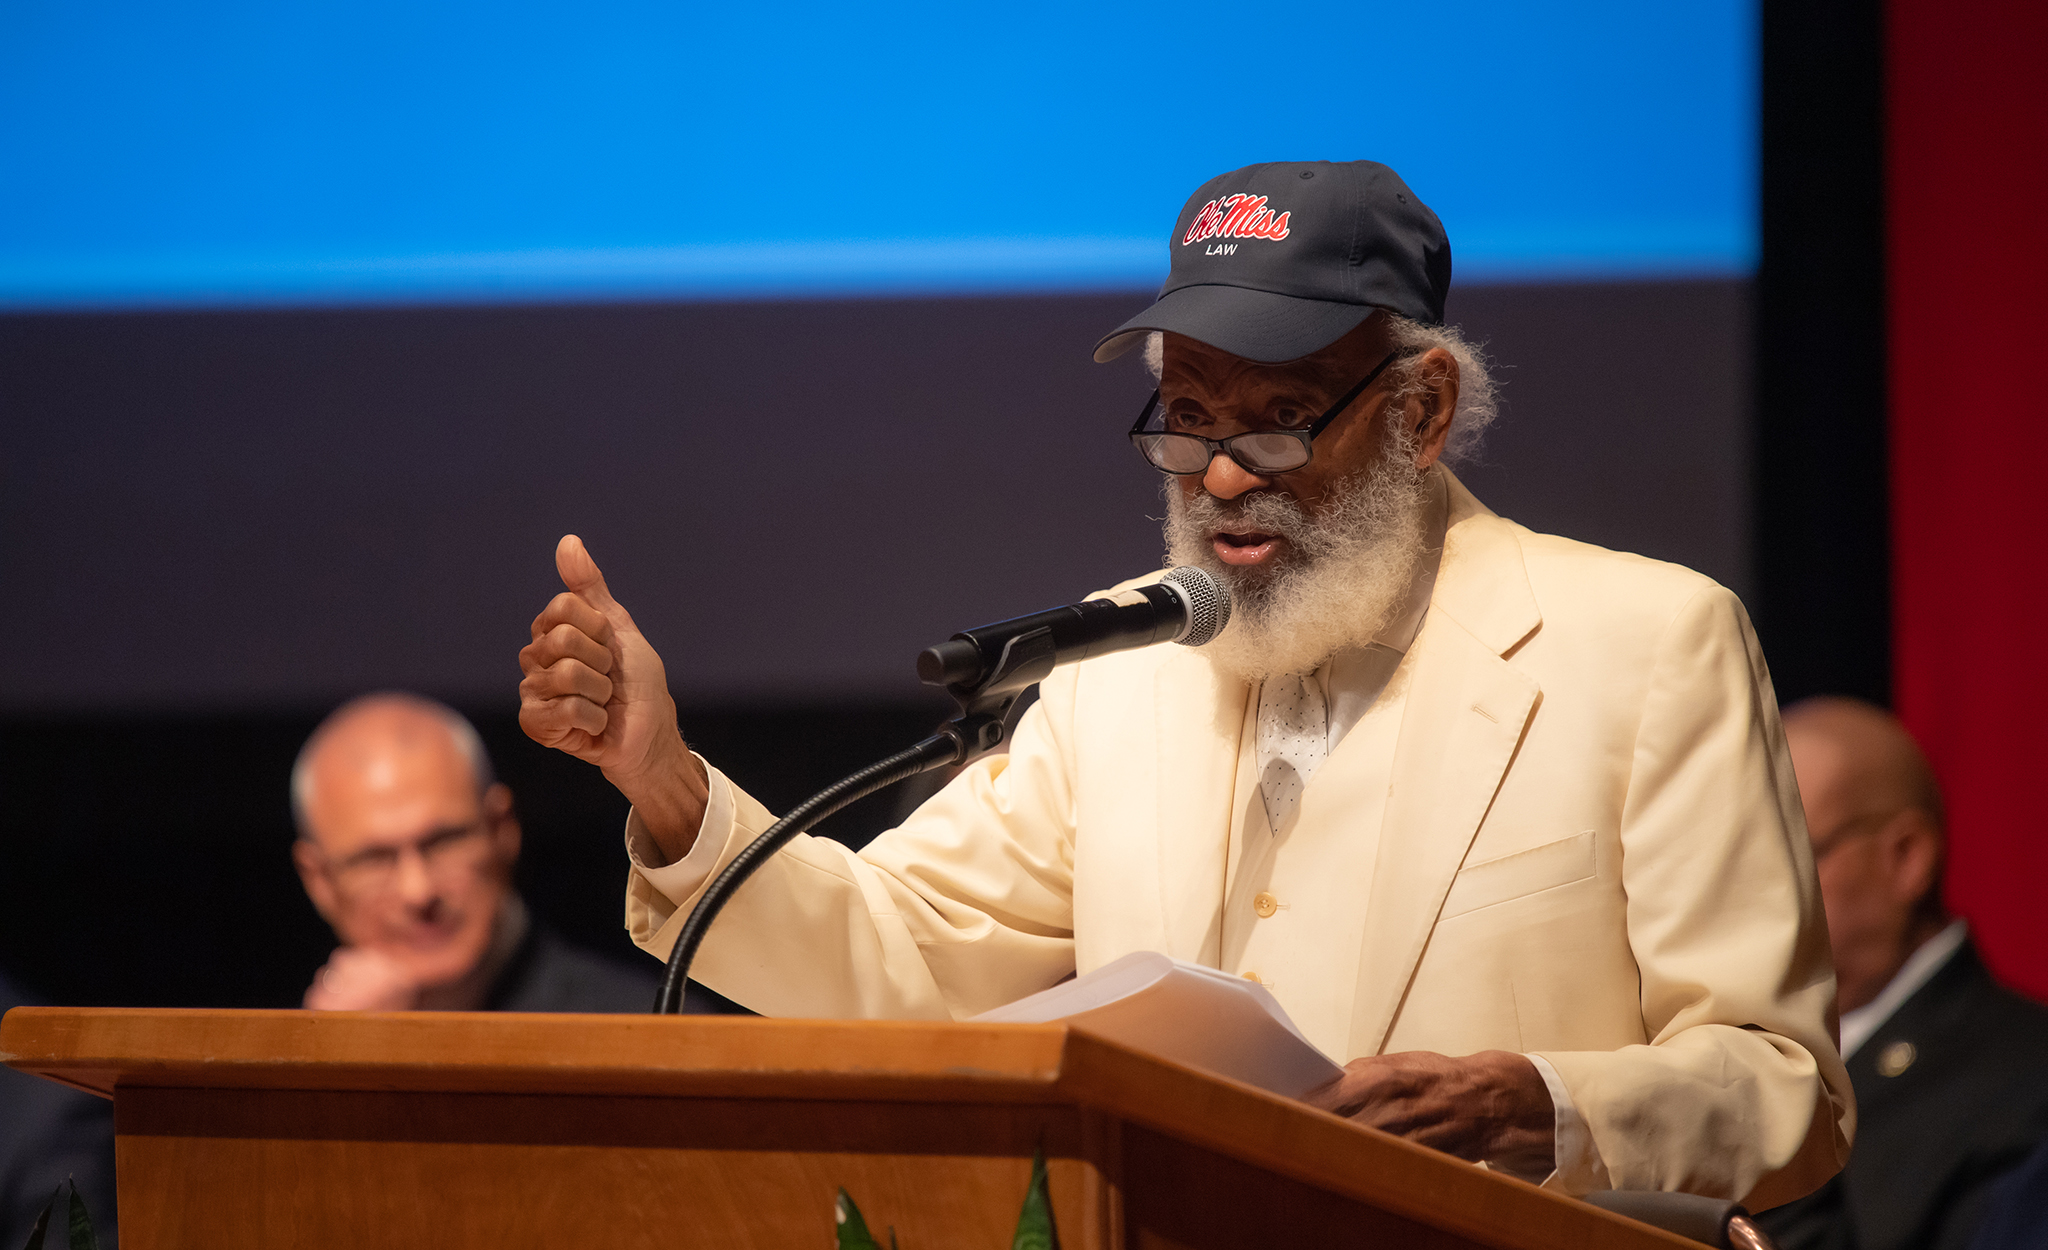 James Meredith speaks Wednesday (Sept. 28) at the Gertrude C. Ford Center for the Performing Arts during ‘The Mission Continues: Building Upon the Legacy,’ a signature event honoring the 60th anniversary of Meredith’s enrollment at the university. Photo by Kevin Bain/Ole Miss Digital Imaging Services